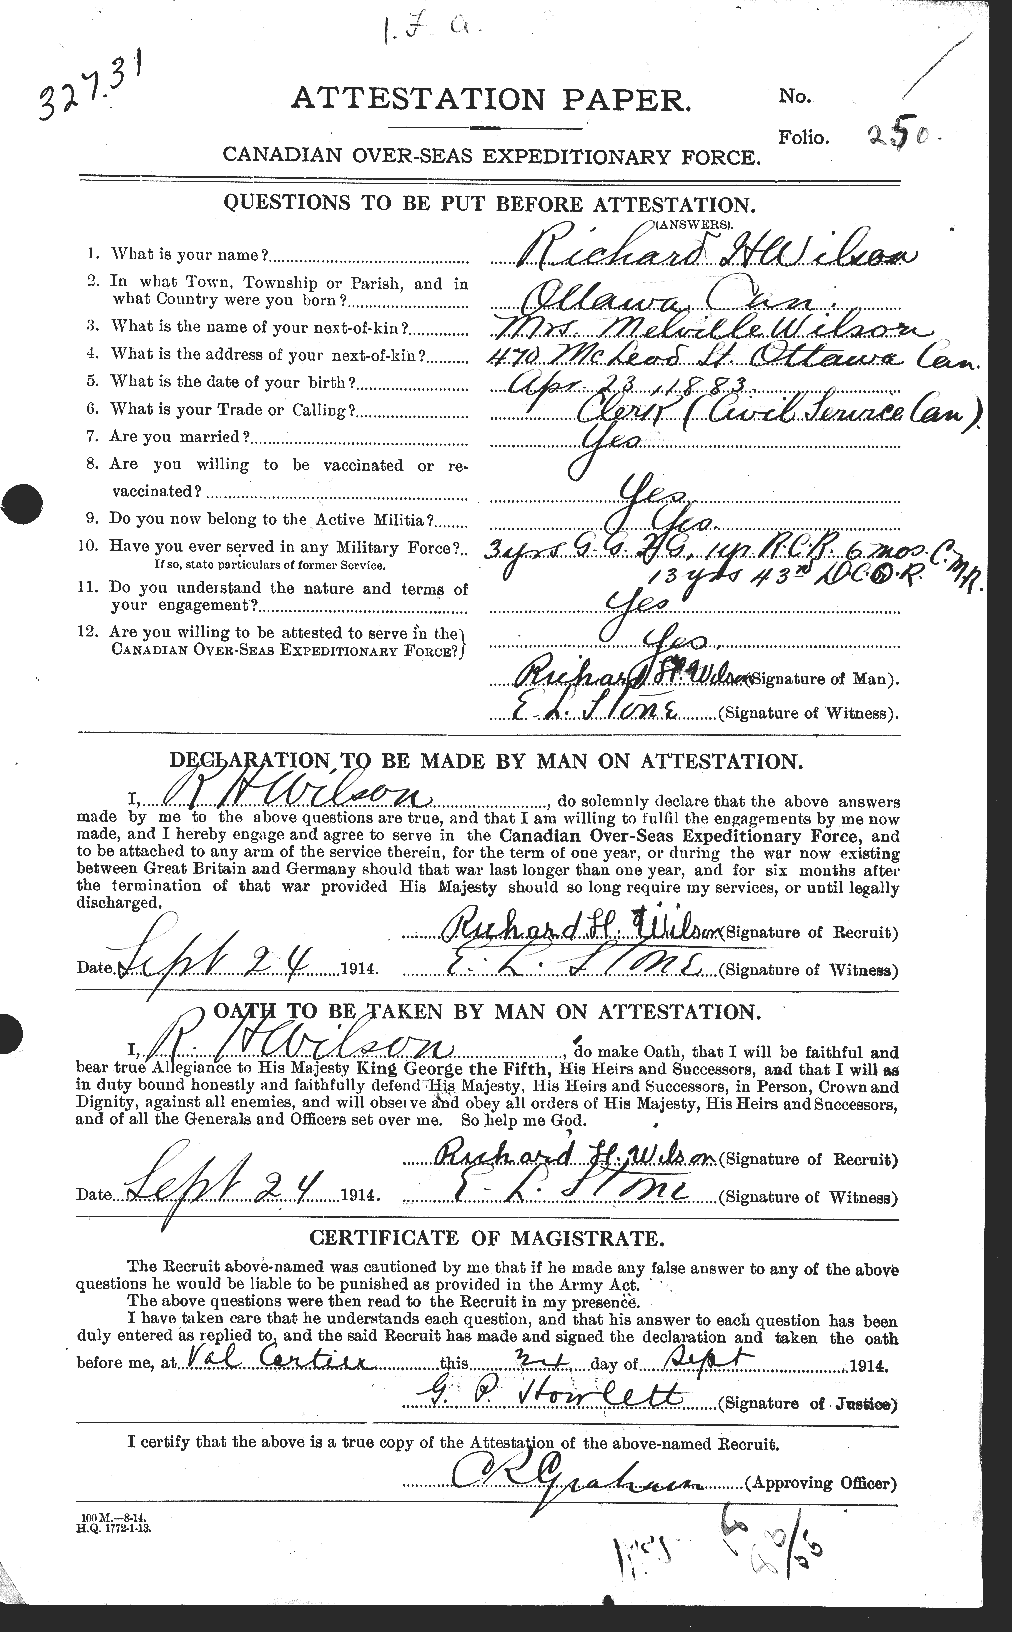 Personnel Records of the First World War - CEF 678854a